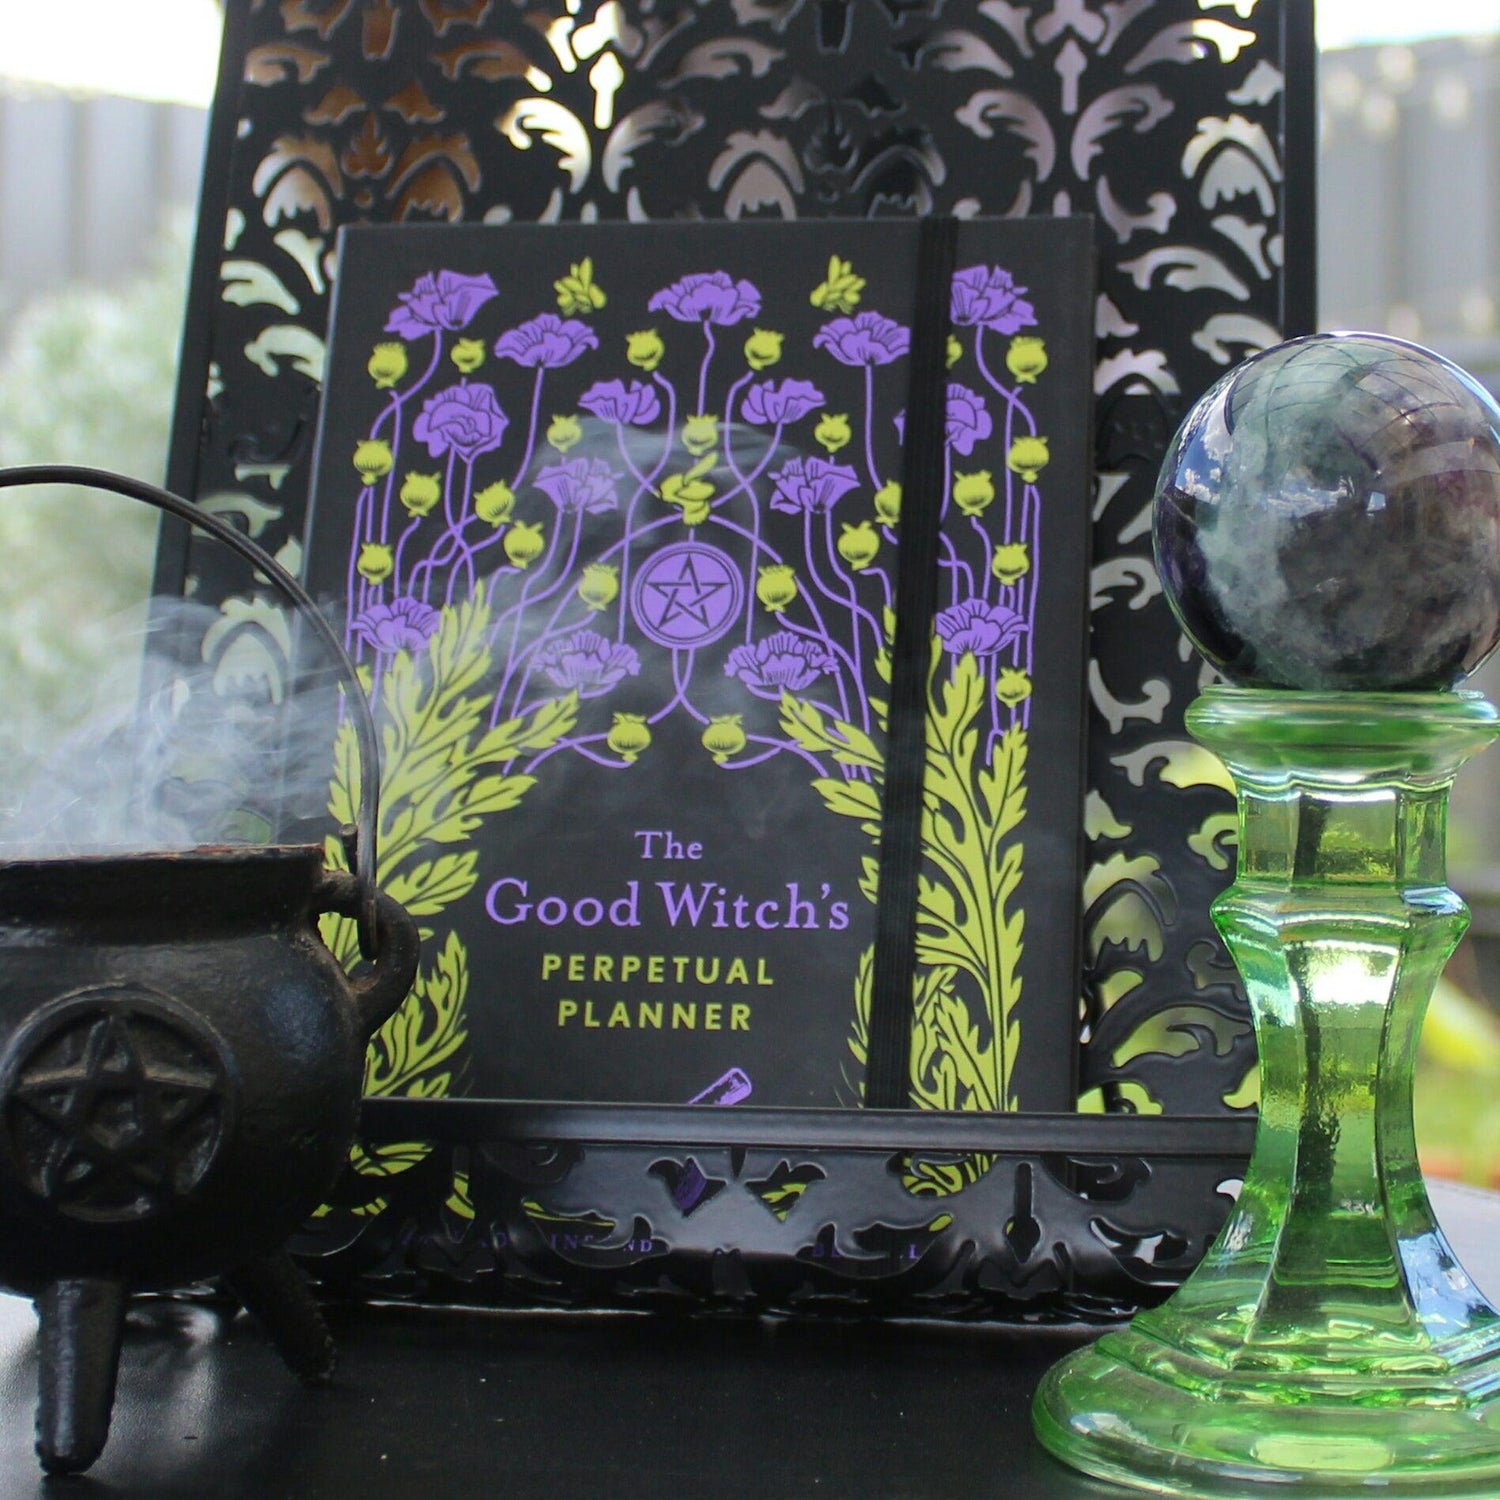 The Good Witch's Perpetual Planner - JOURNEY artisan soaps & candles